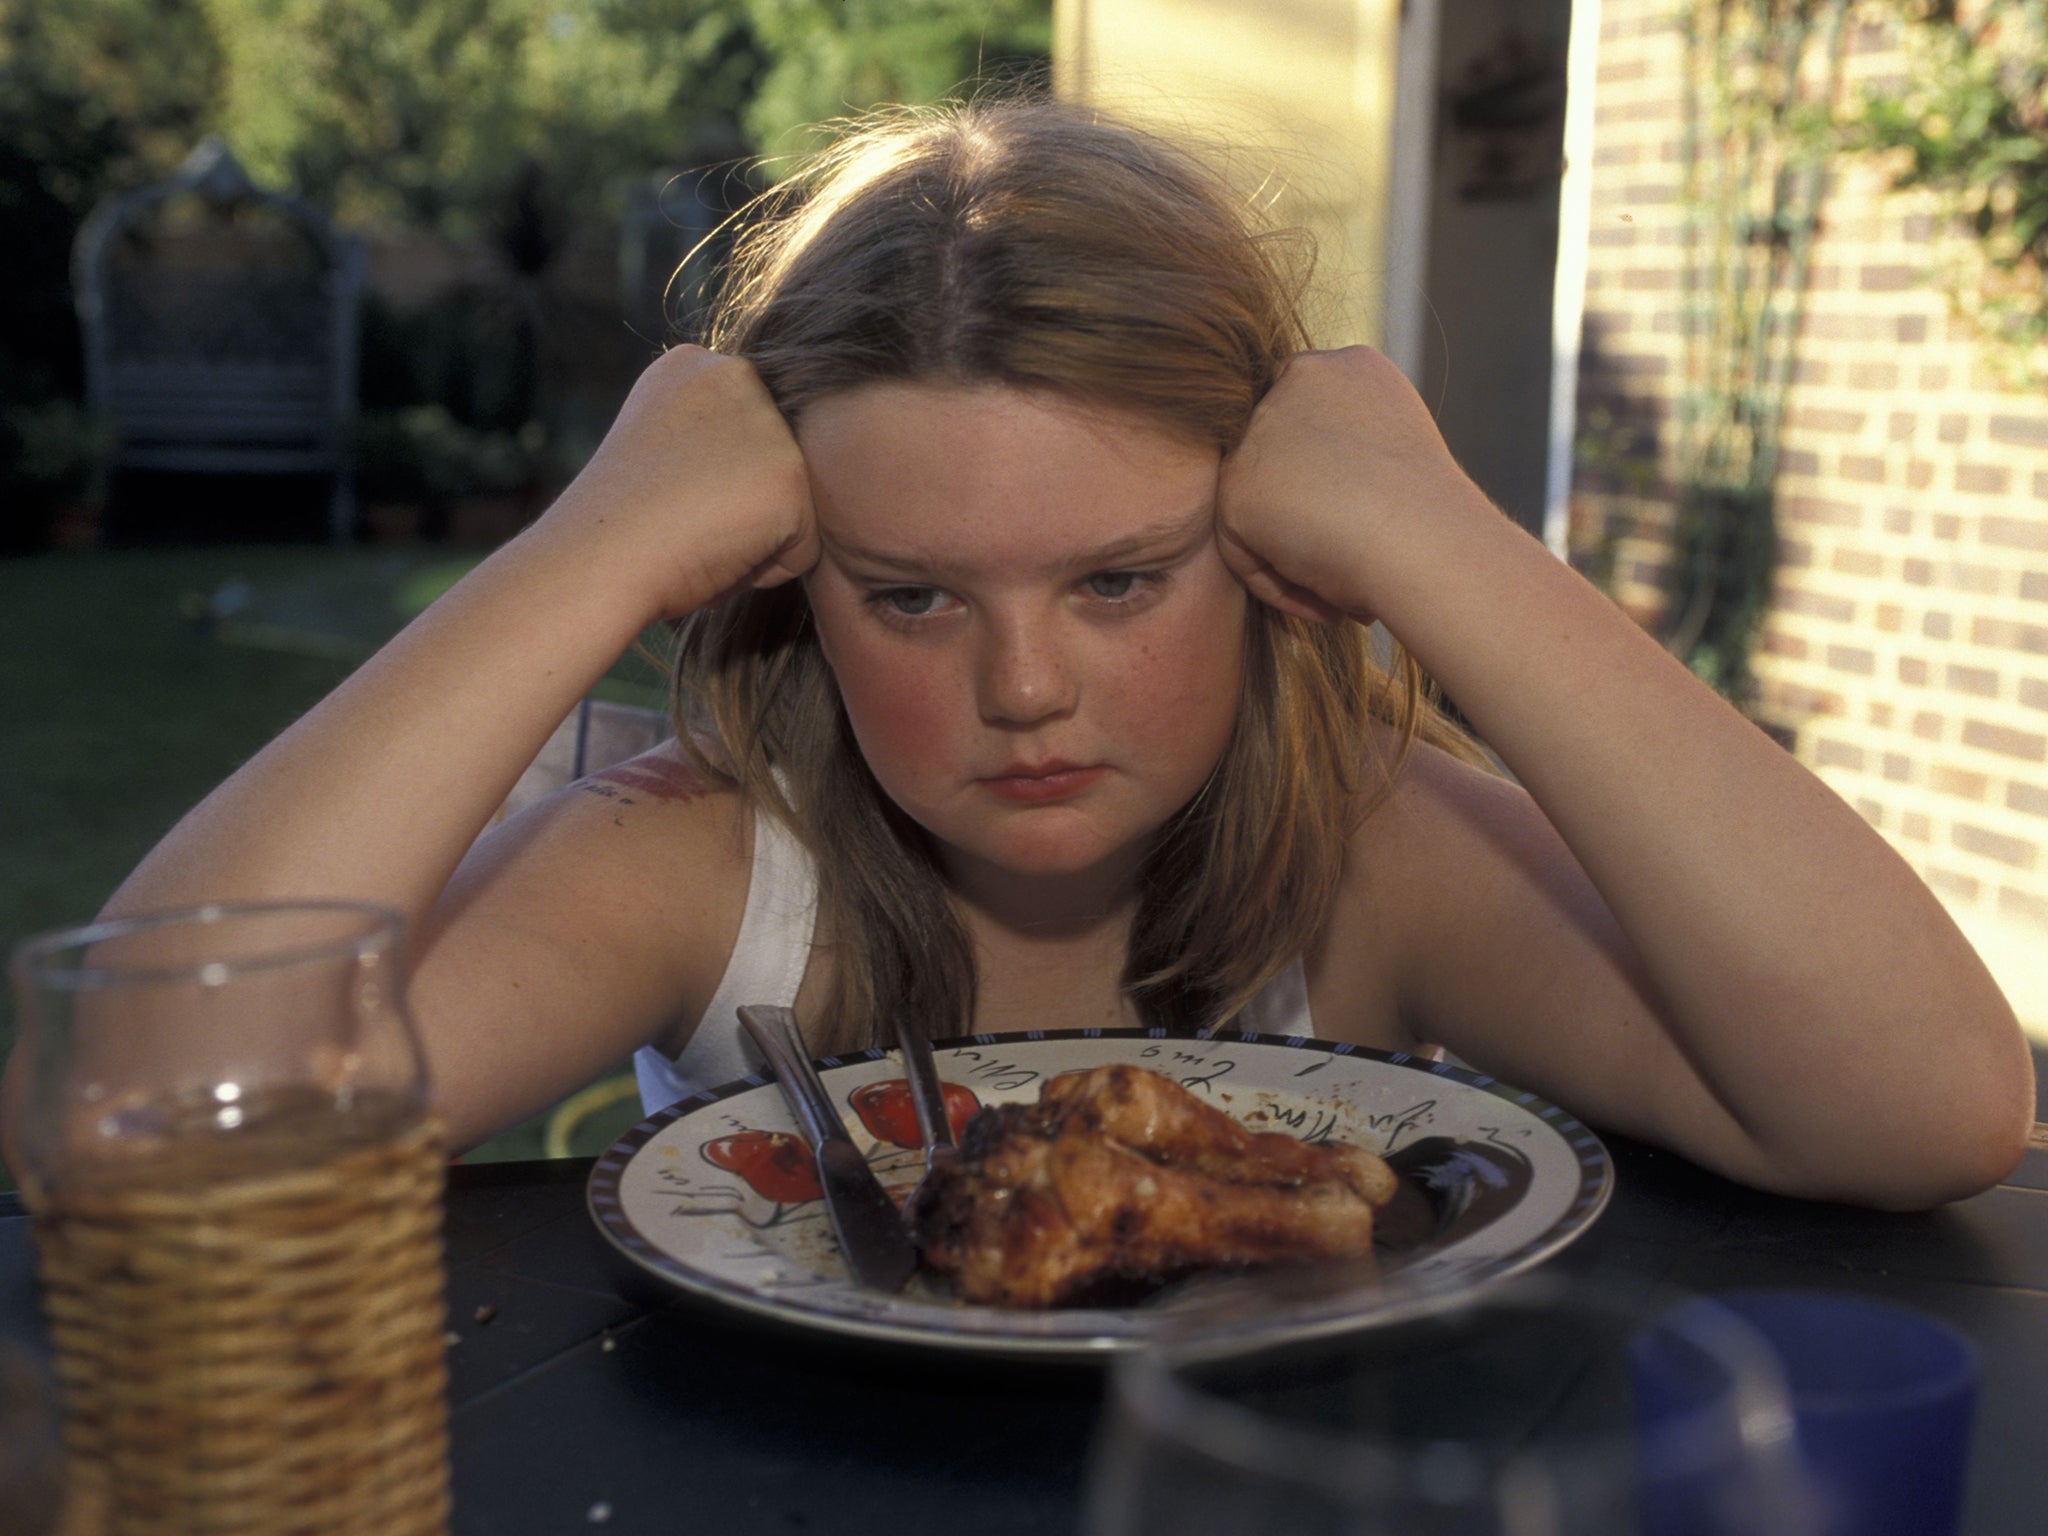 Scientists have discovered that picky eating in small children is not only a sign of a food fussiness, but could also be a precursor to a serious mental problems